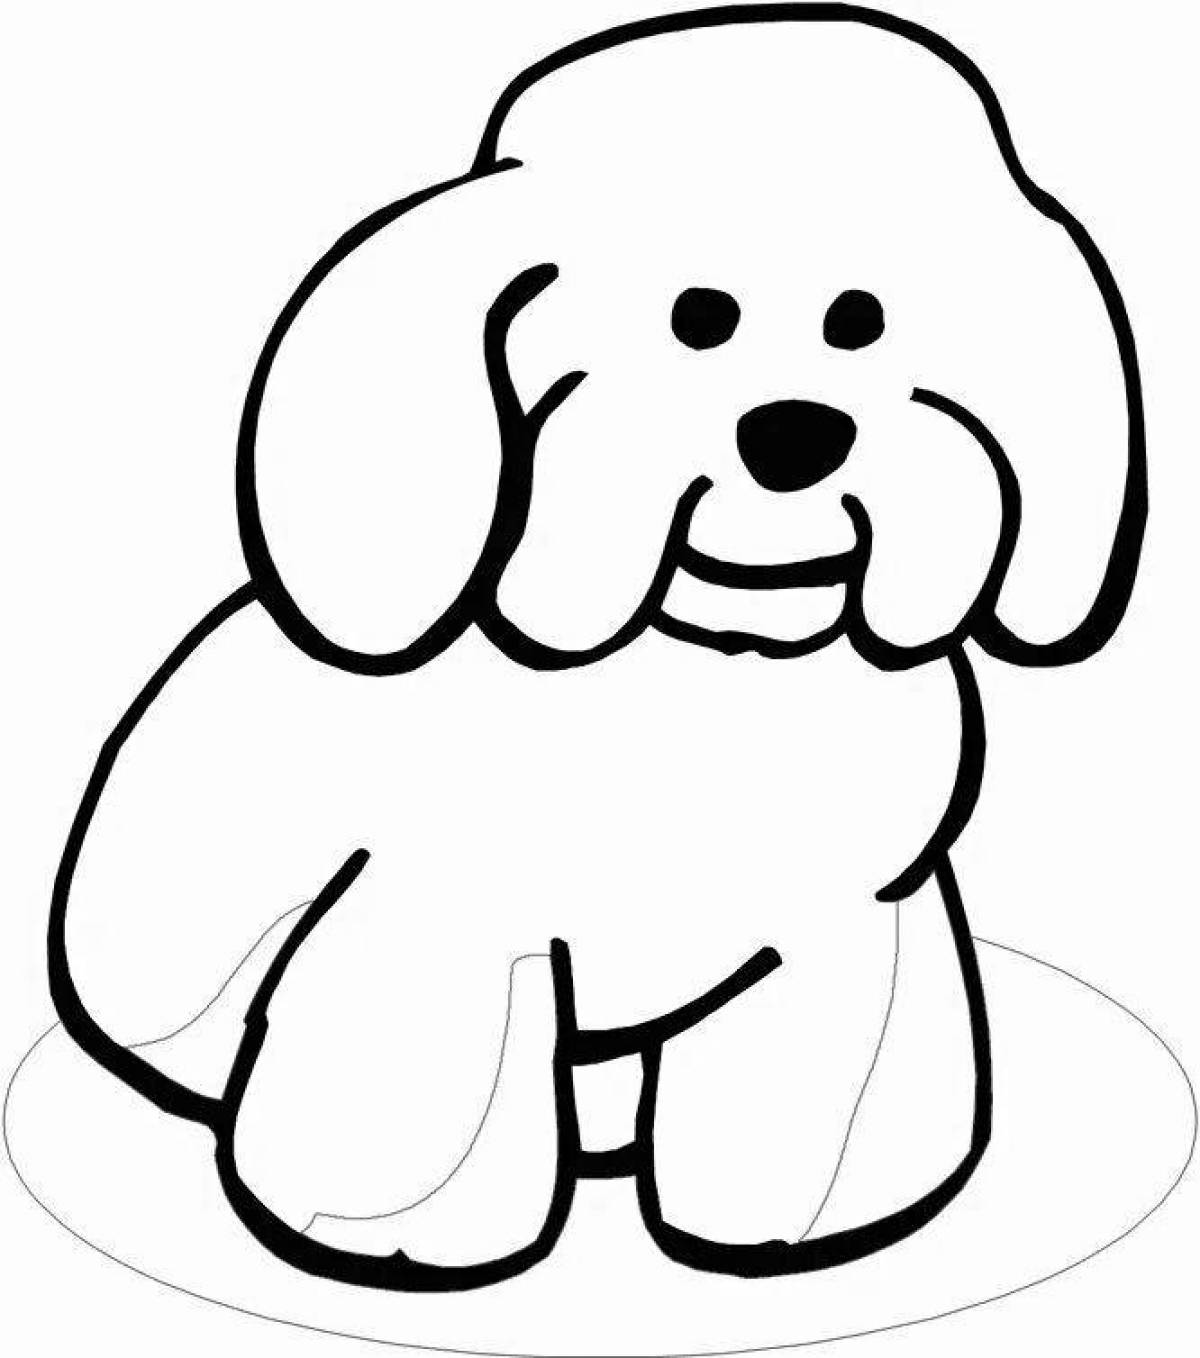 Inquisitive puppy coloring book for kids